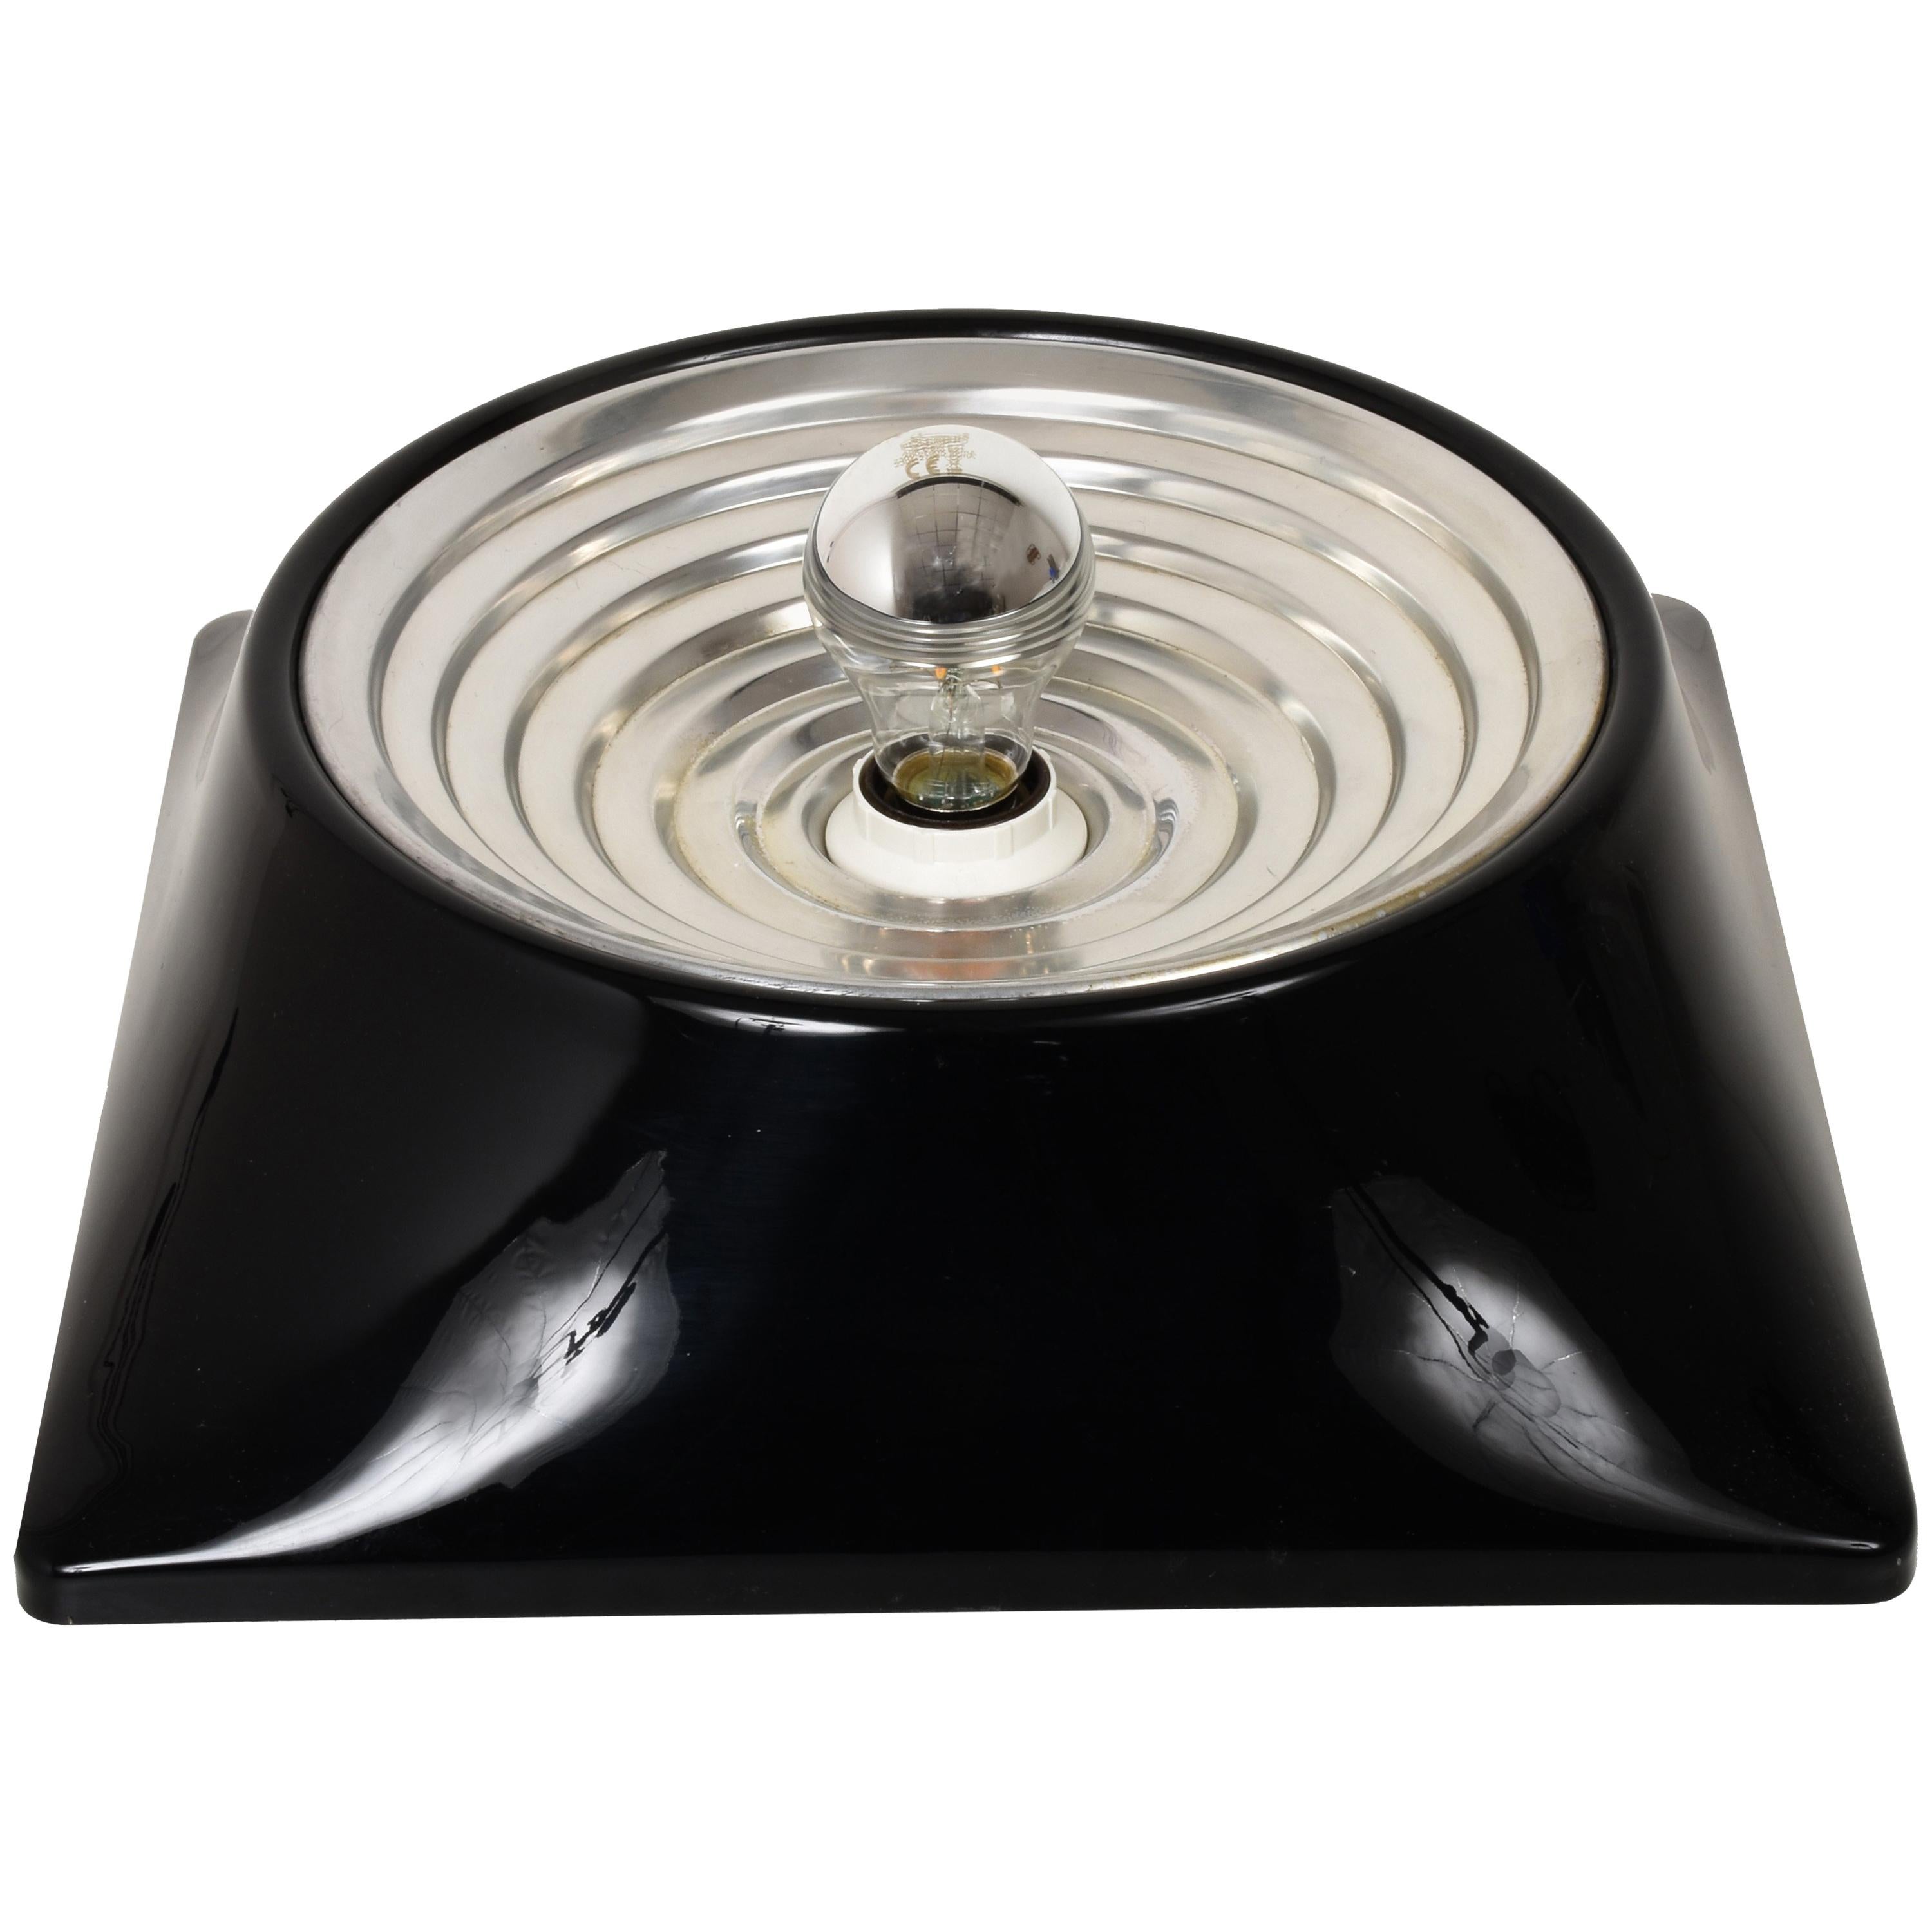 Amazing midcentury black resin sconce model 1369. It was designed in Italy by Studio Nizzoli Associati for Stilnovo in 1969.

The black resin printed support play with the reflective disc in chromed metal producing a unique aesthetic